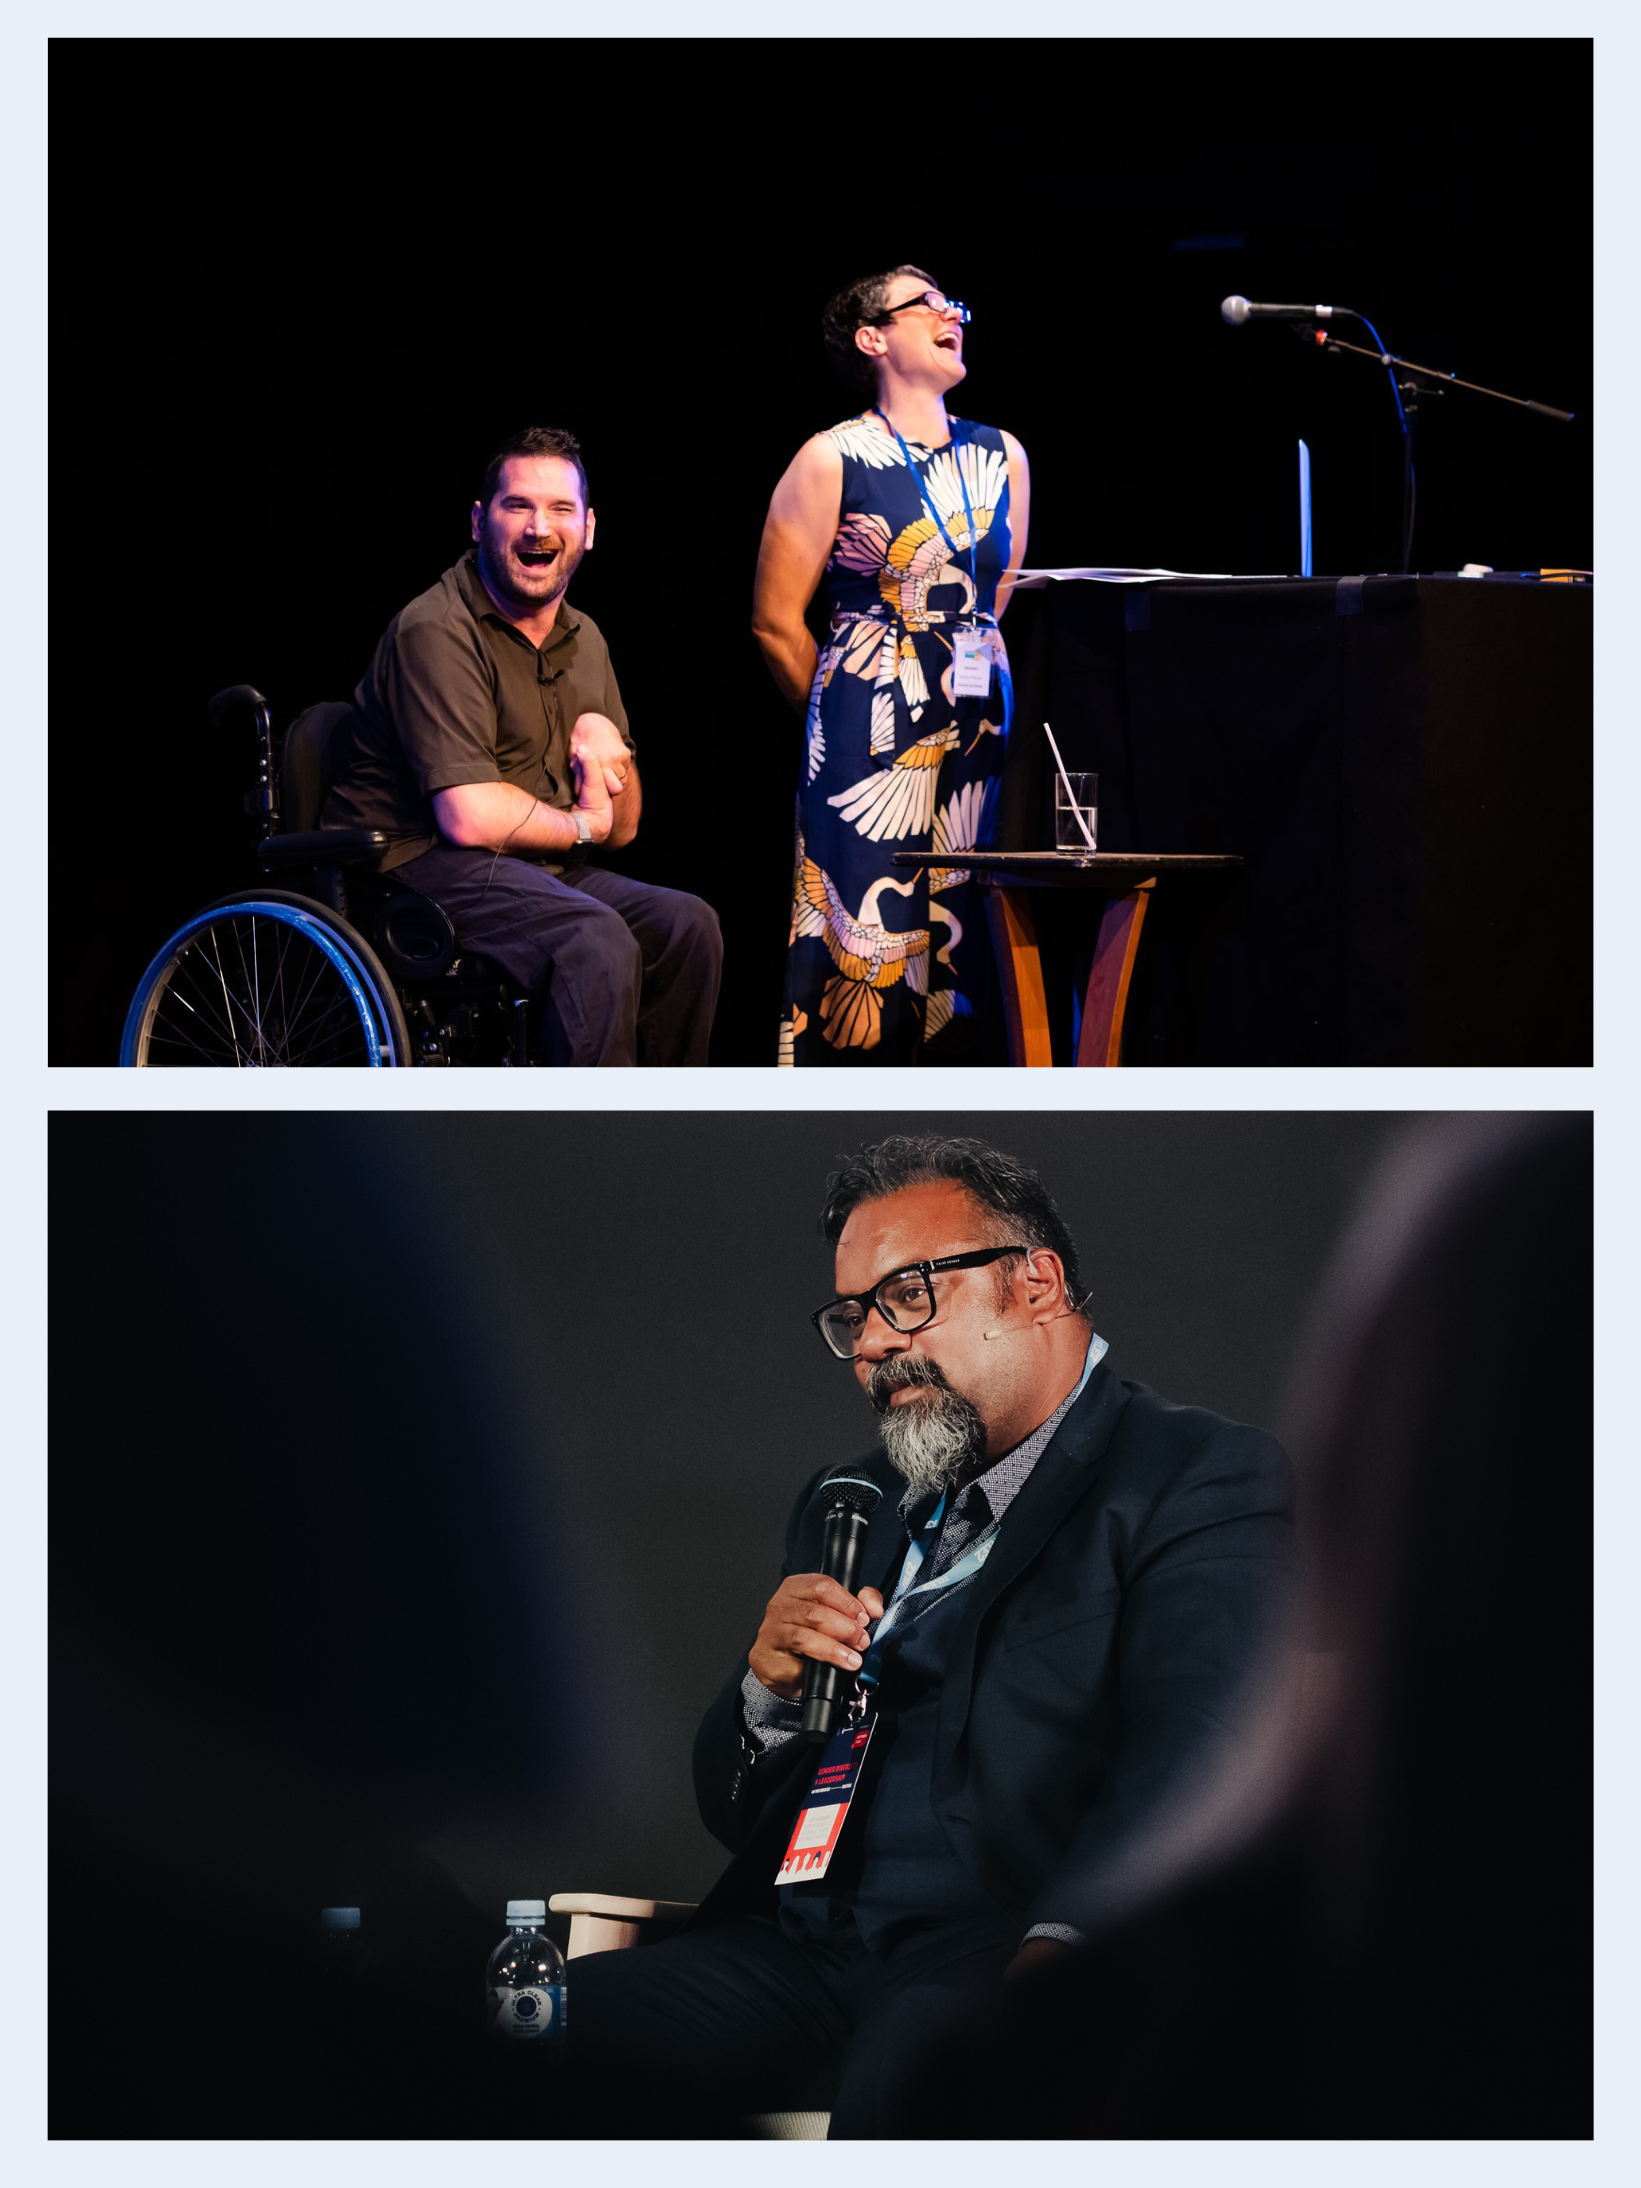 Two separate images. In the top photo, Adam, a white man with dark brown hair, who is a wheelchair user, and Emma, a white woman with dark brown hair, are on stage at a conference behind a lecturn. They are both laughing and smiling widely. In the bottom photo, Atif, a brown man with dark hair, glasses and a grey beard, is sat speaking into a microphone and smiling slightly as he speaks.